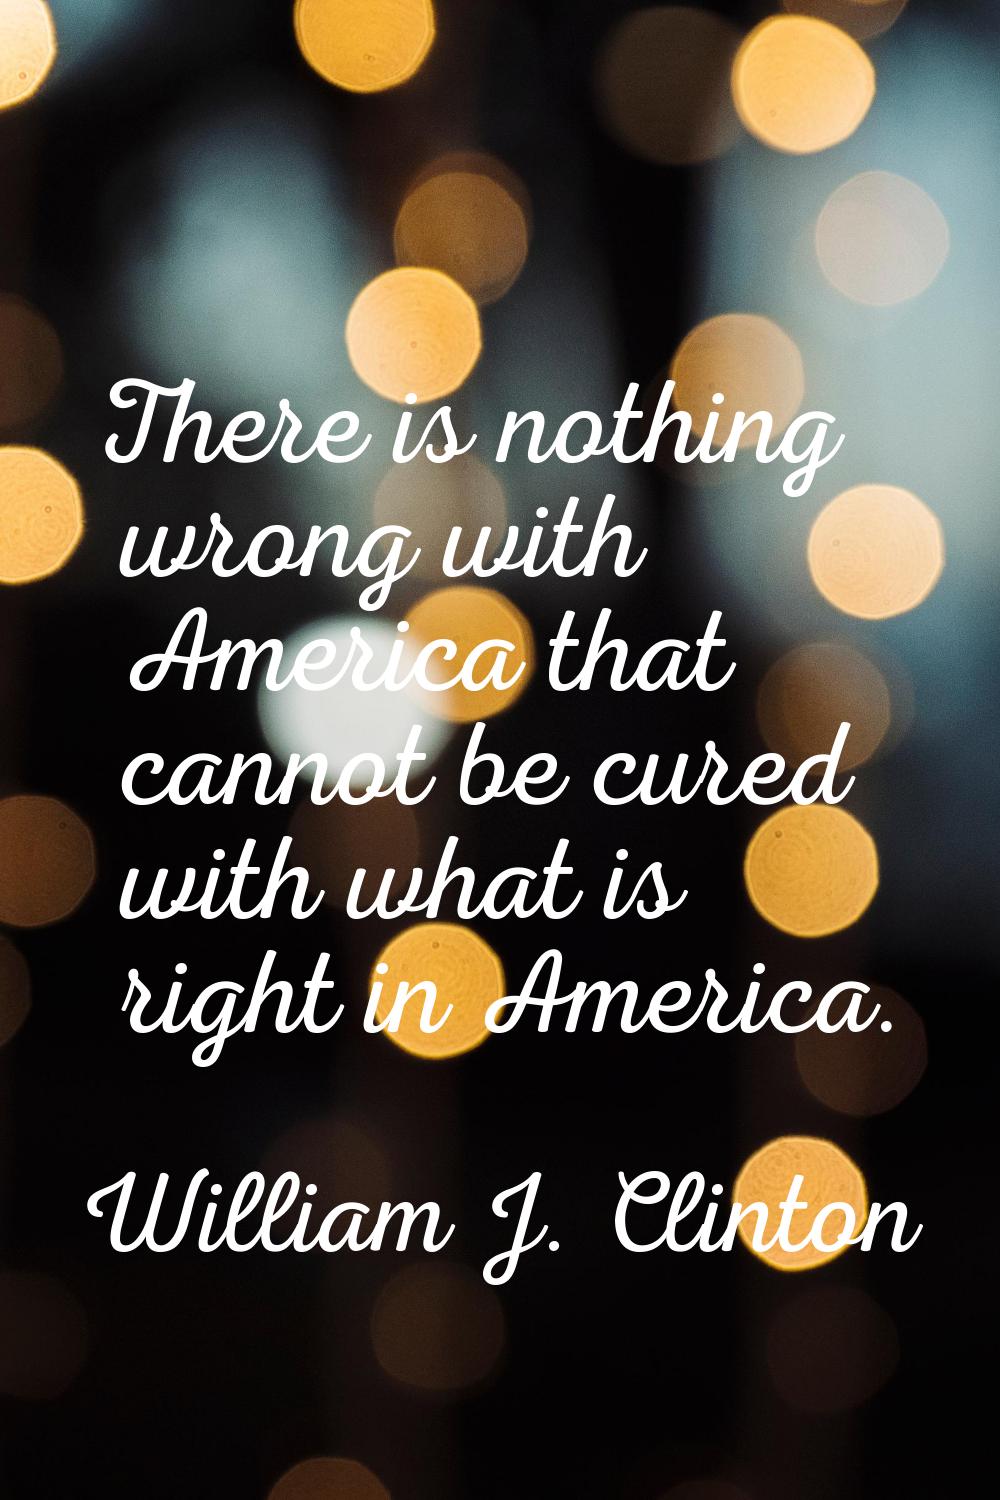 There is nothing wrong with America that cannot be cured with what is right in America.